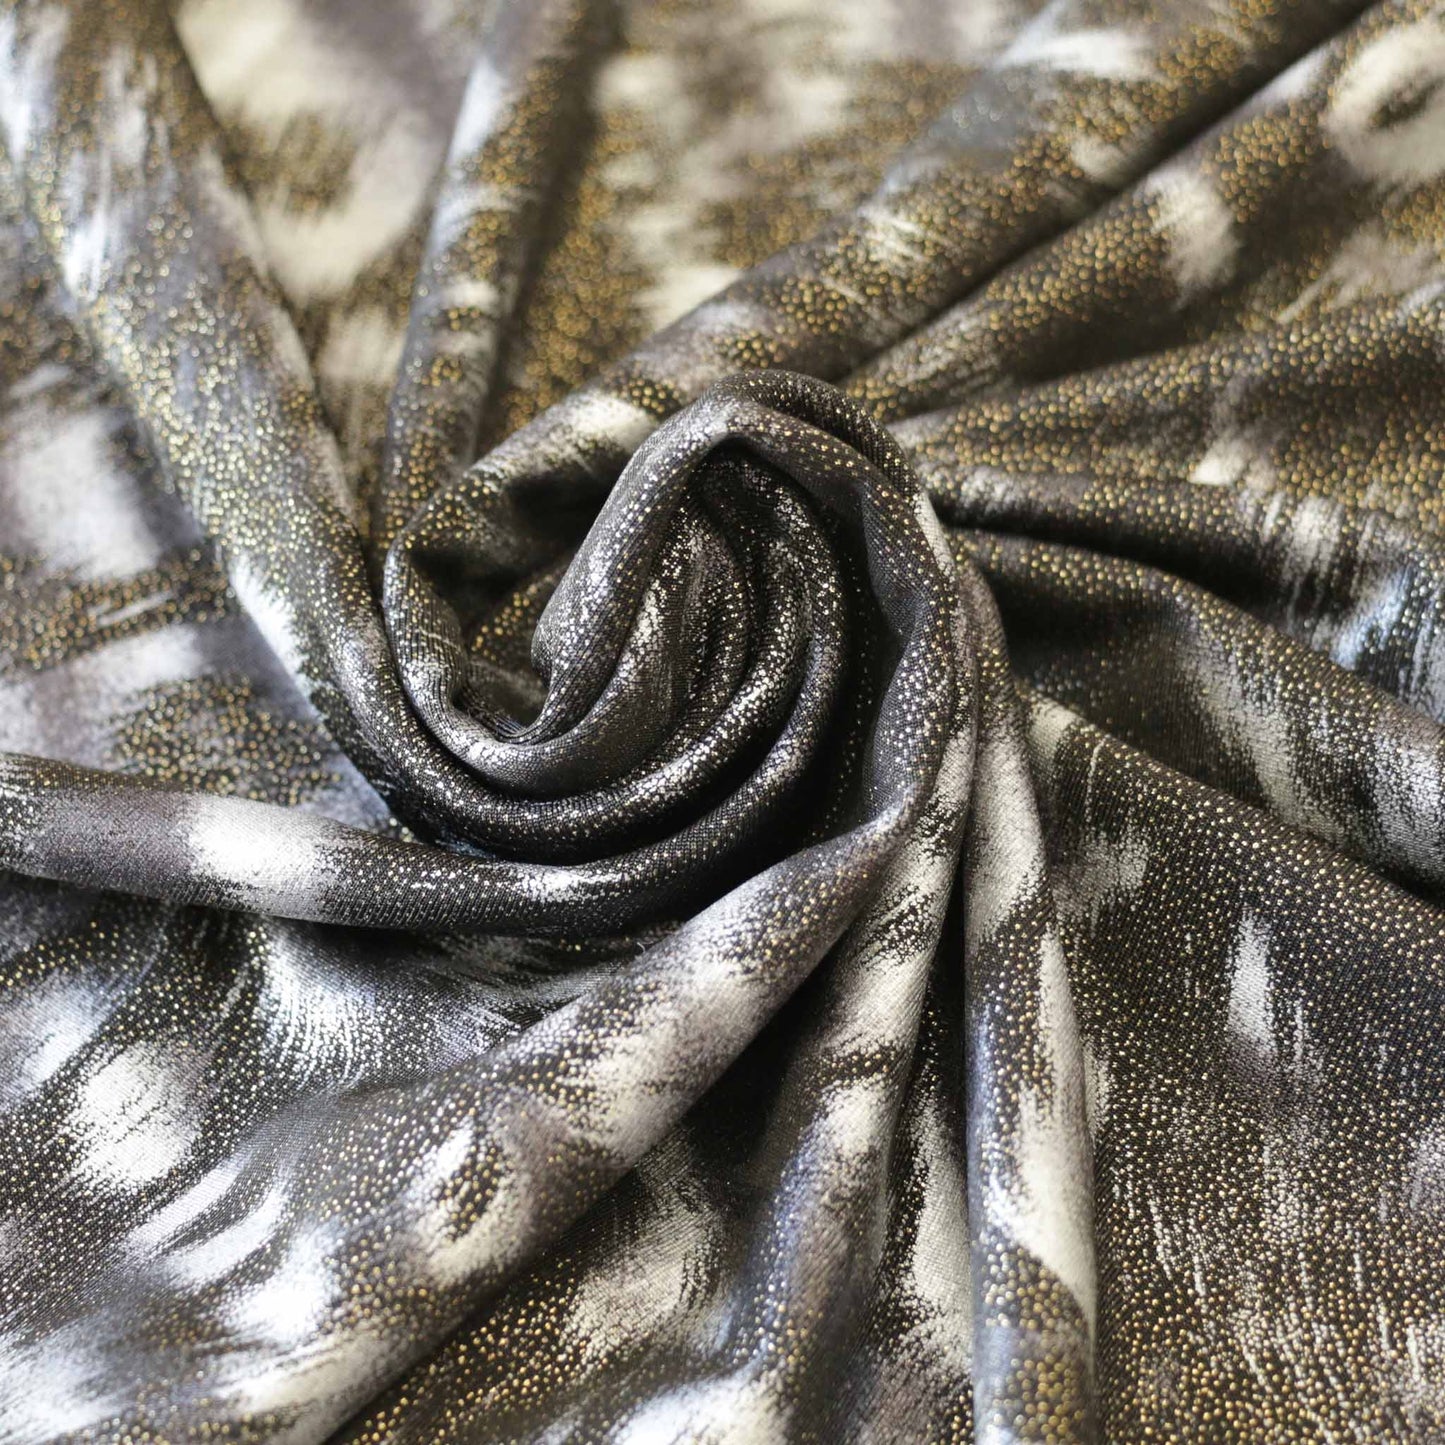 shiny gold and black lycra dressmaking fabric with animal print design